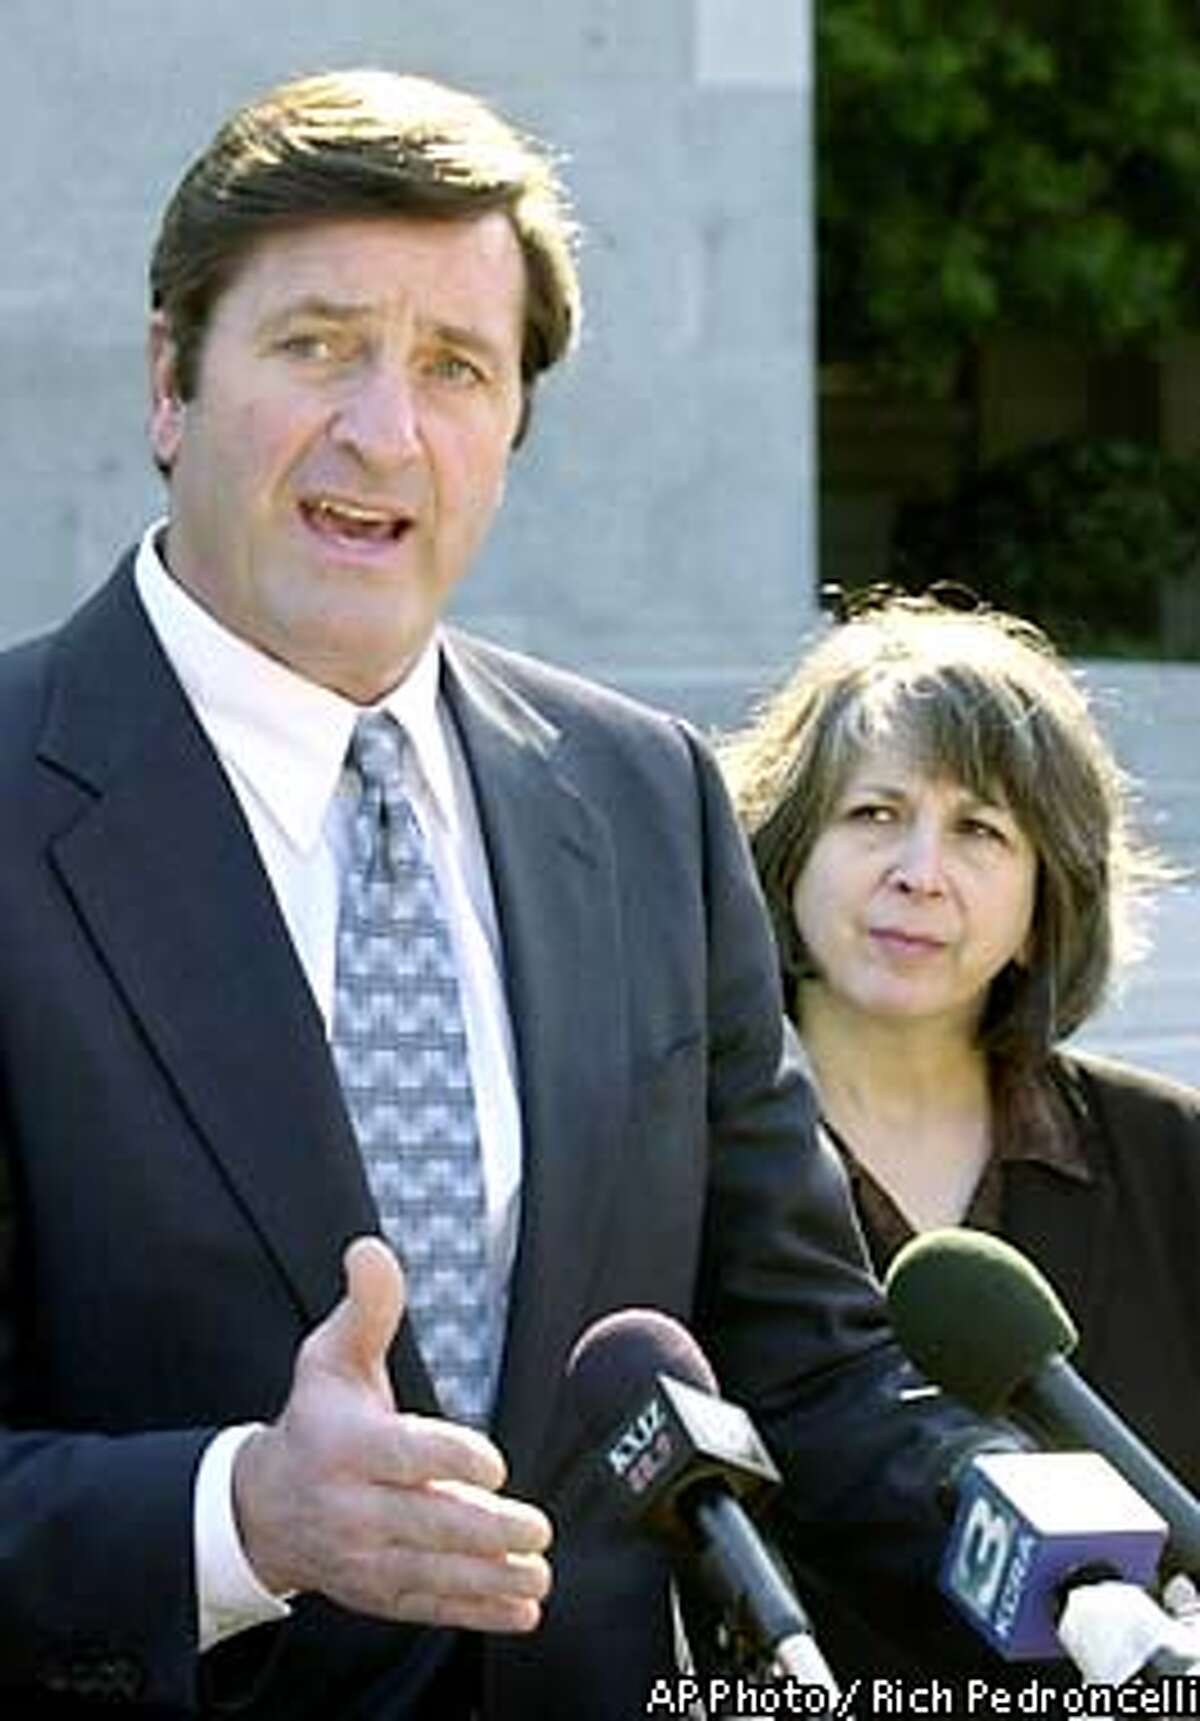 John Garamendi, one of three Democratic candidates for insurance commissioner, speaks during a news conference at the Capitol in Sacramento, Calif., Thursday, Feb. 28, 2002, with whistleblower Cindy Ossias, right. Garamendi criticized fellow Democratic nominee, Assemblyman Tom Calderon, for taking campaign contributions from the insurance industry. (AP Photo/Rich Pedroncelli)